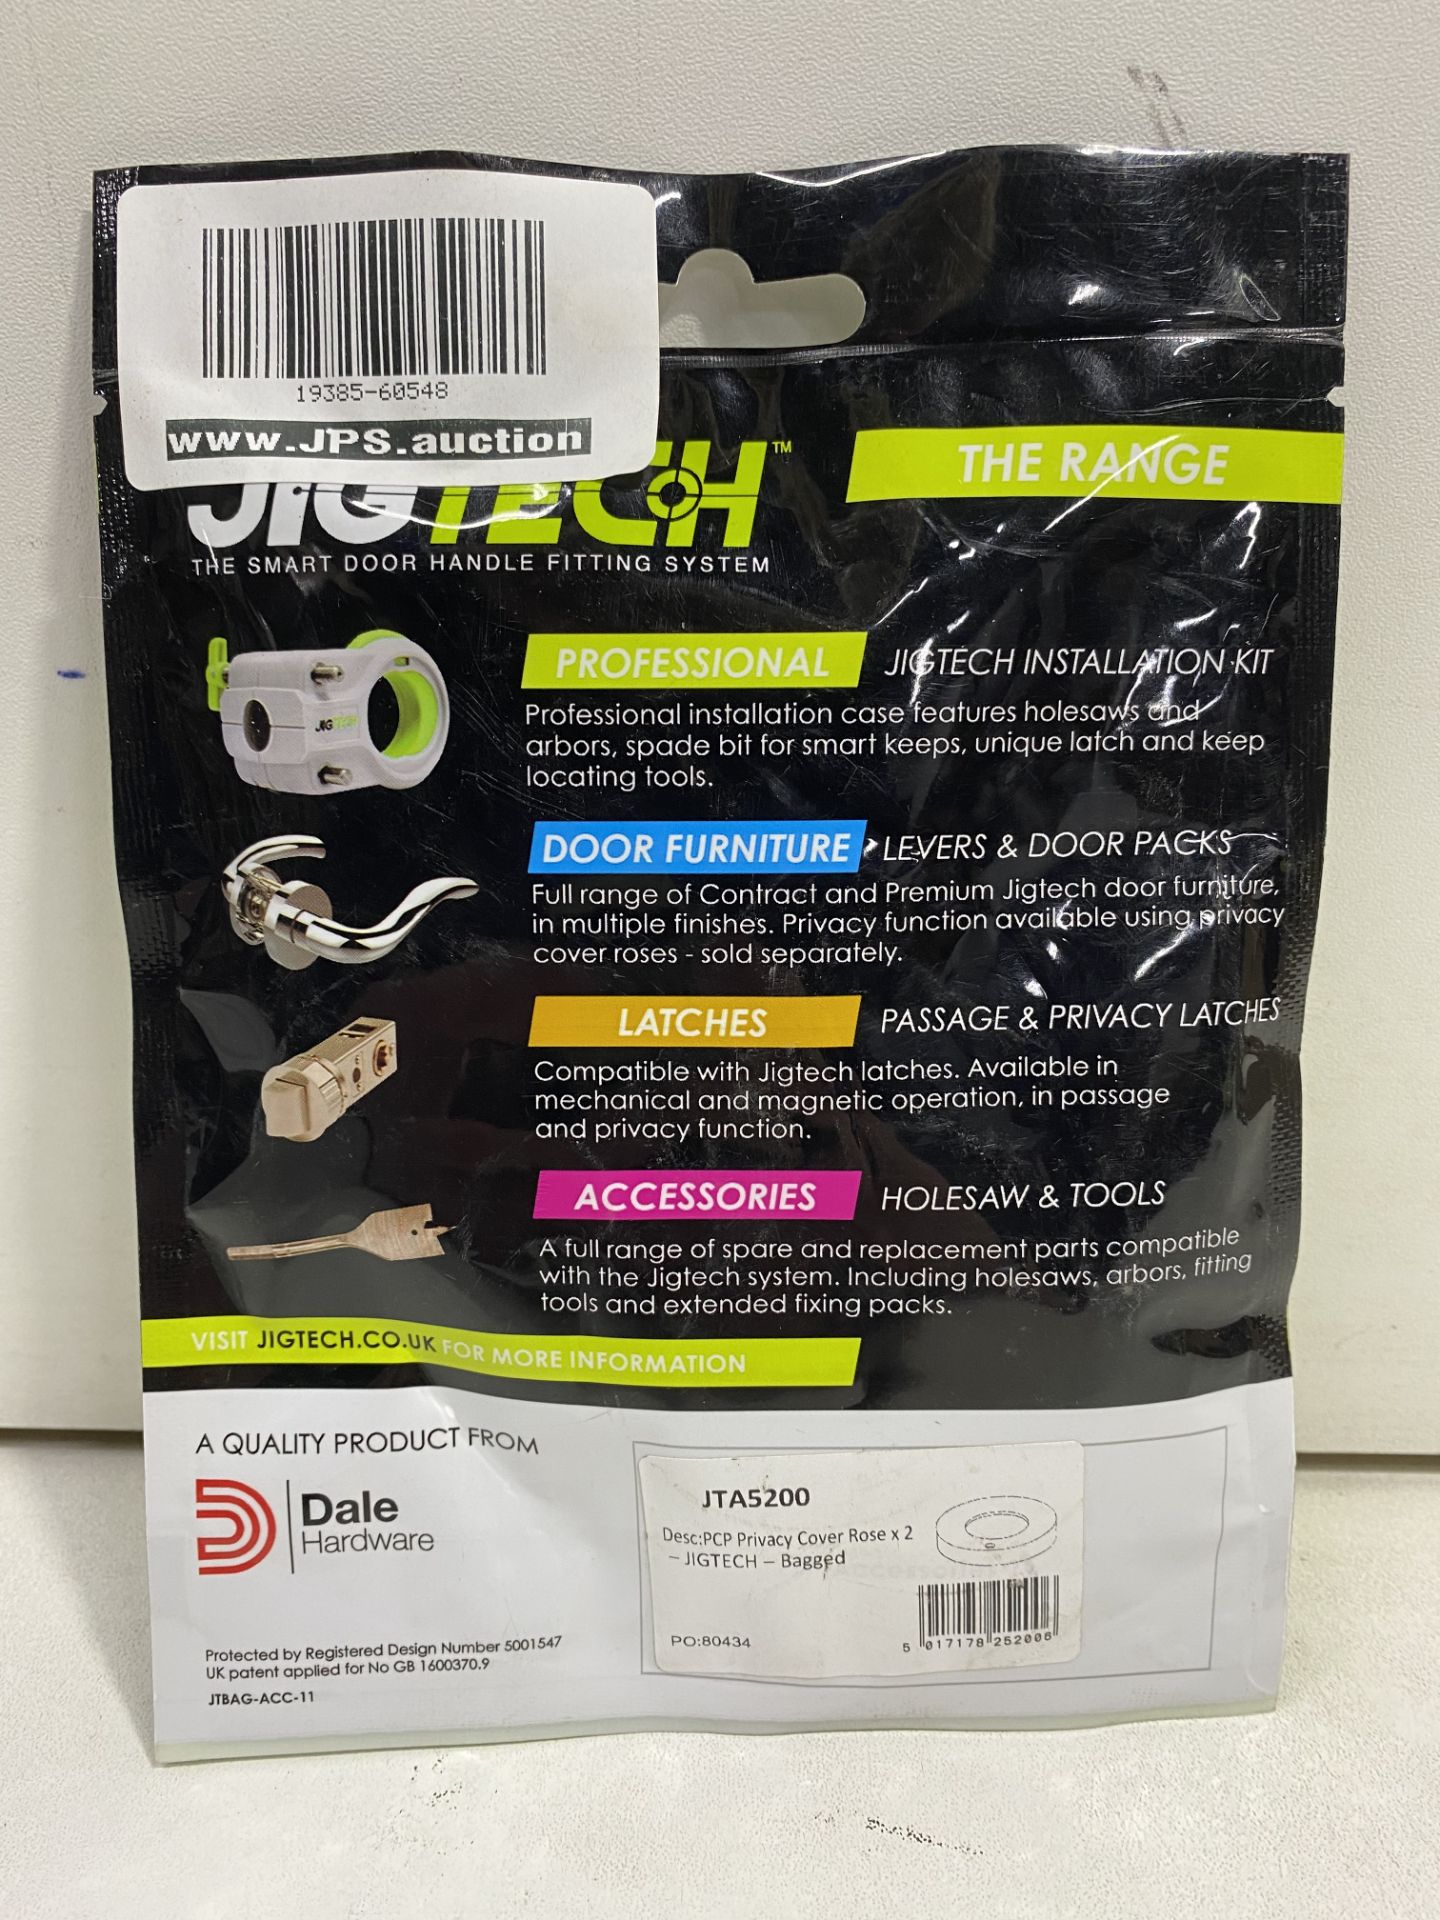 Mixed Lot Of Jigtech Tubular Latches And Accessories - Image 8 of 12